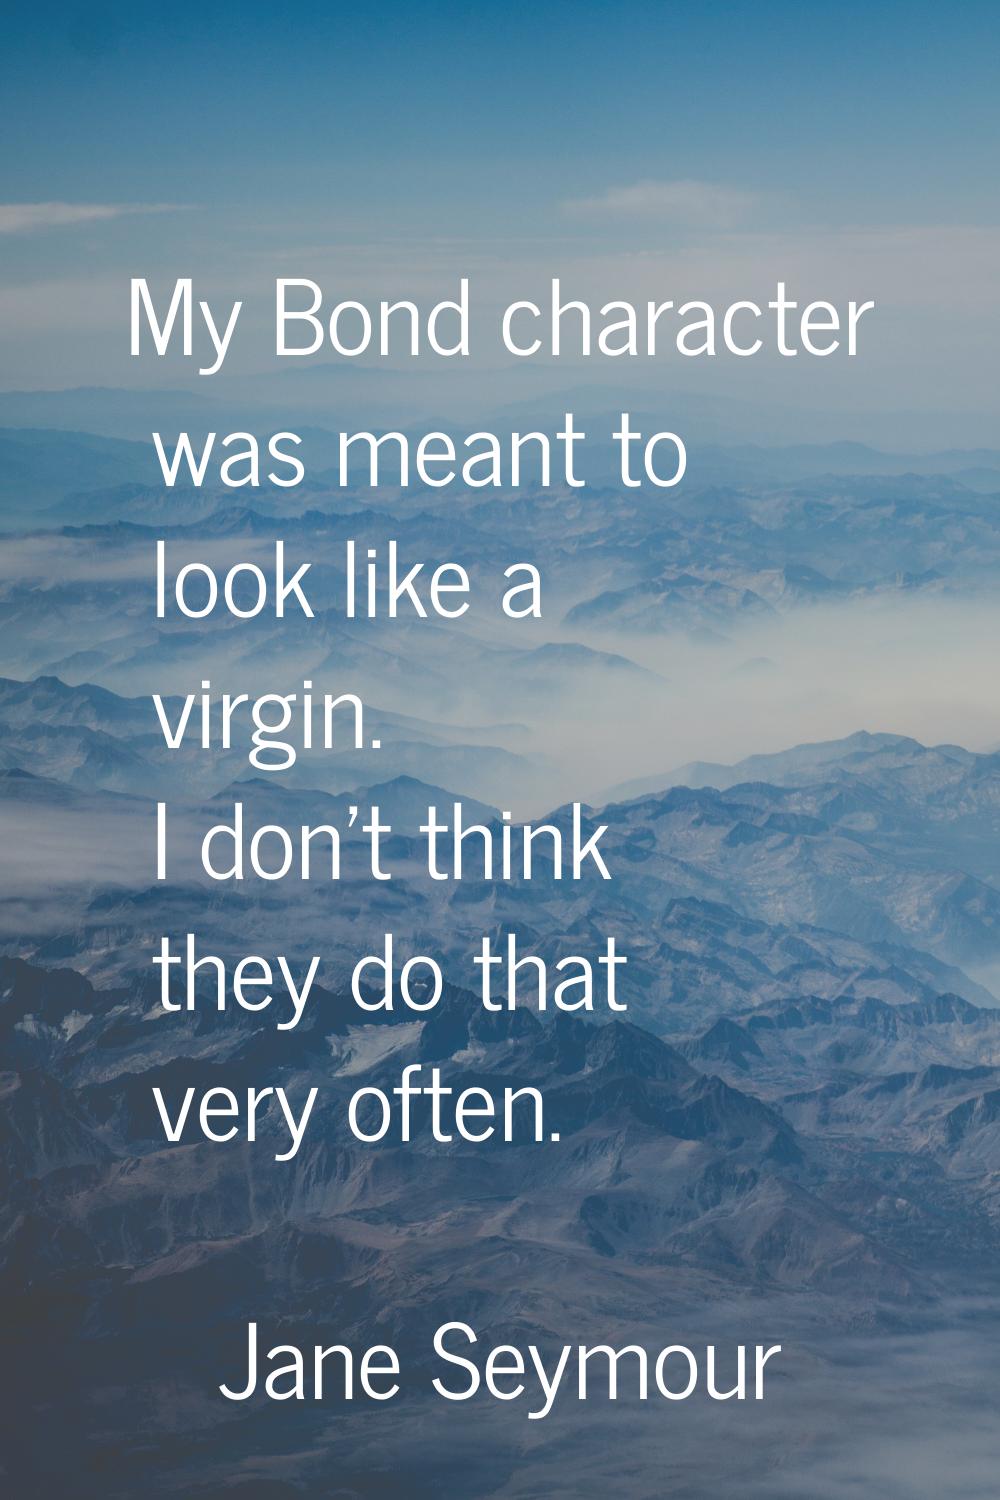 My Bond character was meant to look like a virgin. I don't think they do that very often.